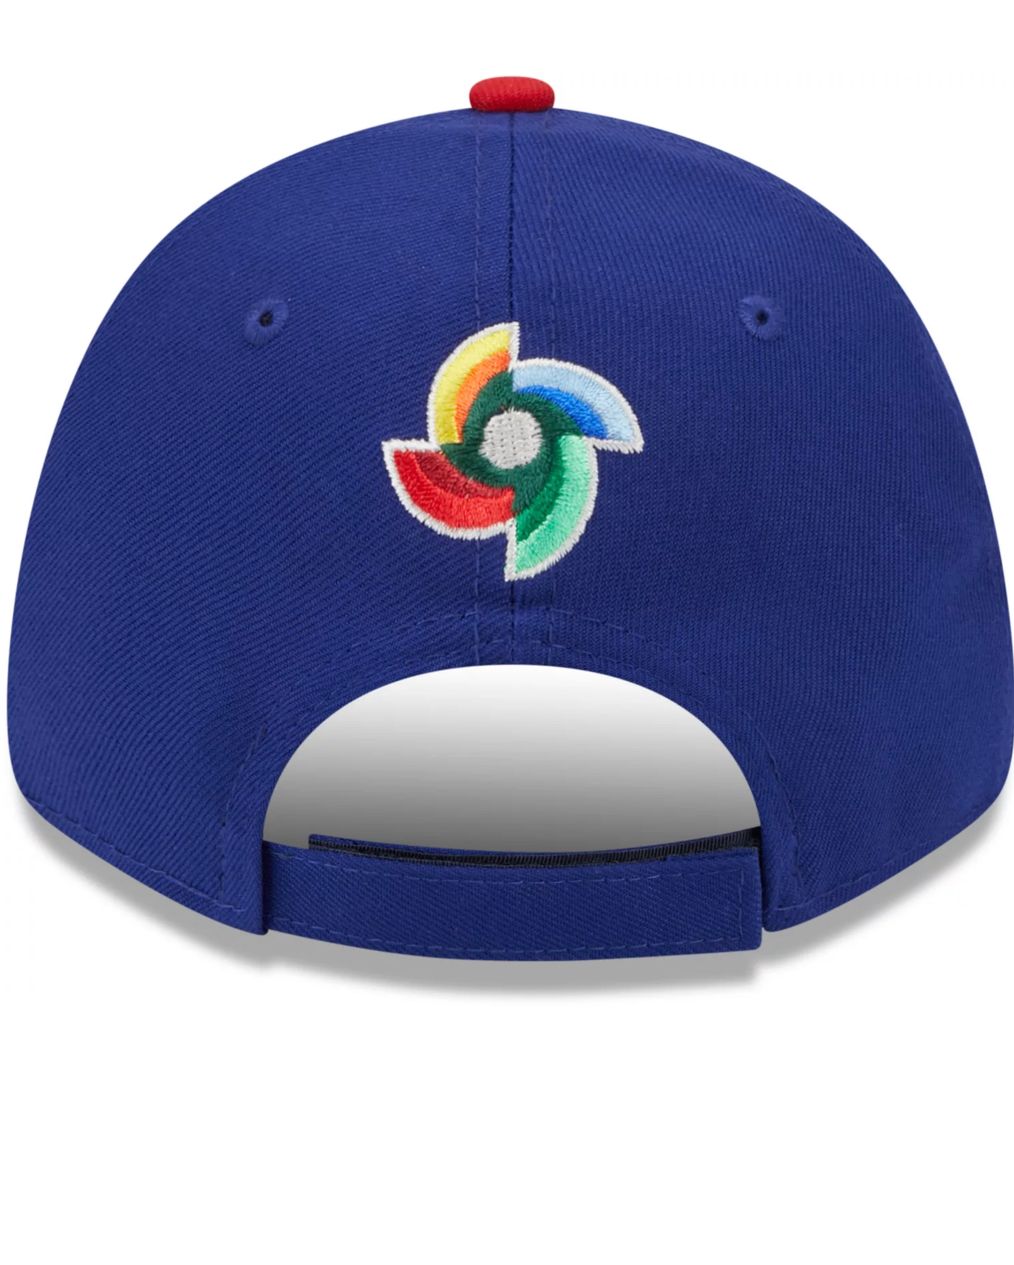 New Era 59FIFTY 2023 World Baseball Classic Dominican Republic Fitted Hat 7 1/4